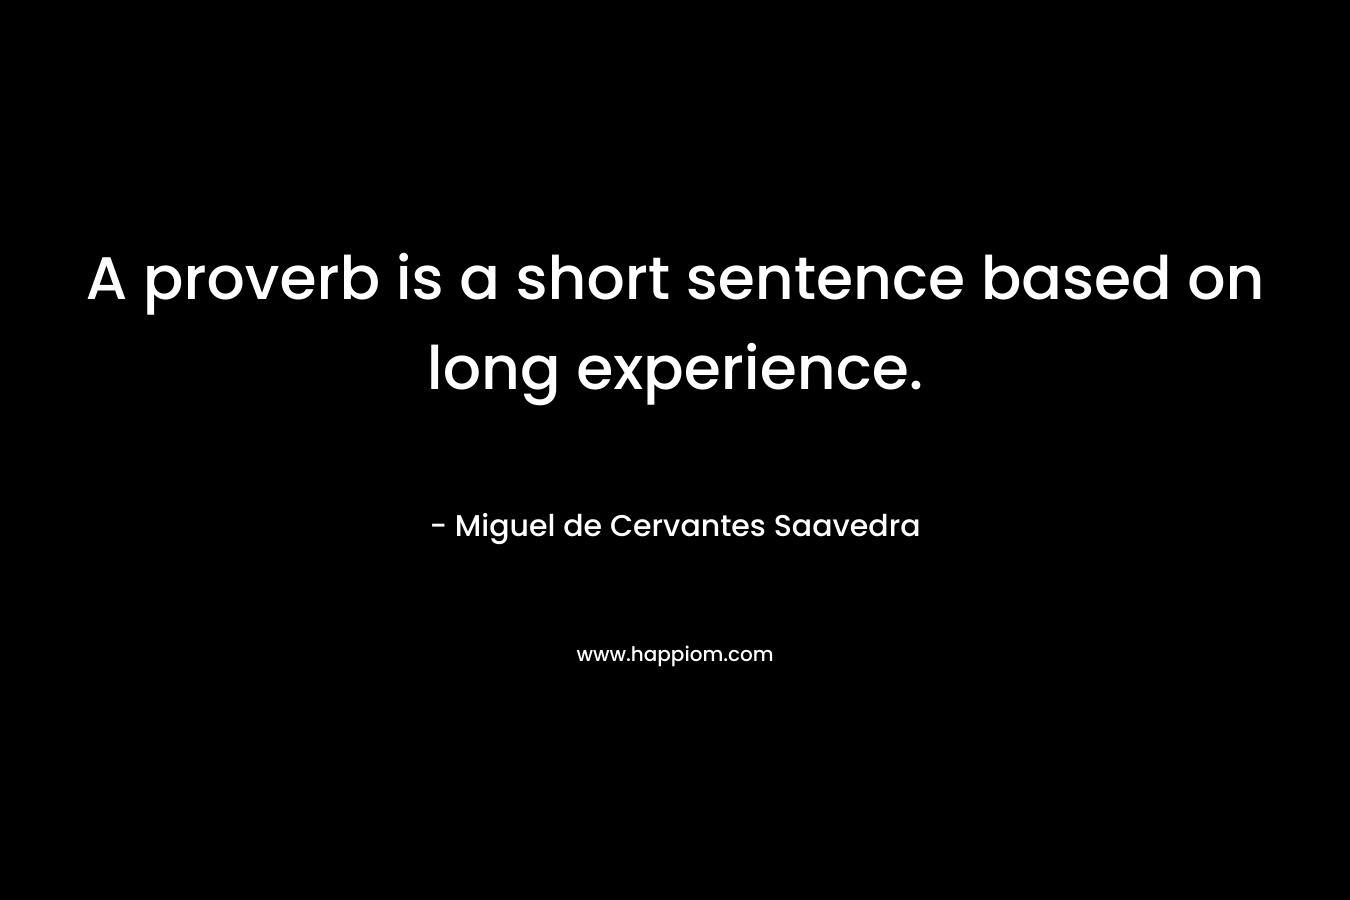 A proverb is a short sentence based on long experience.